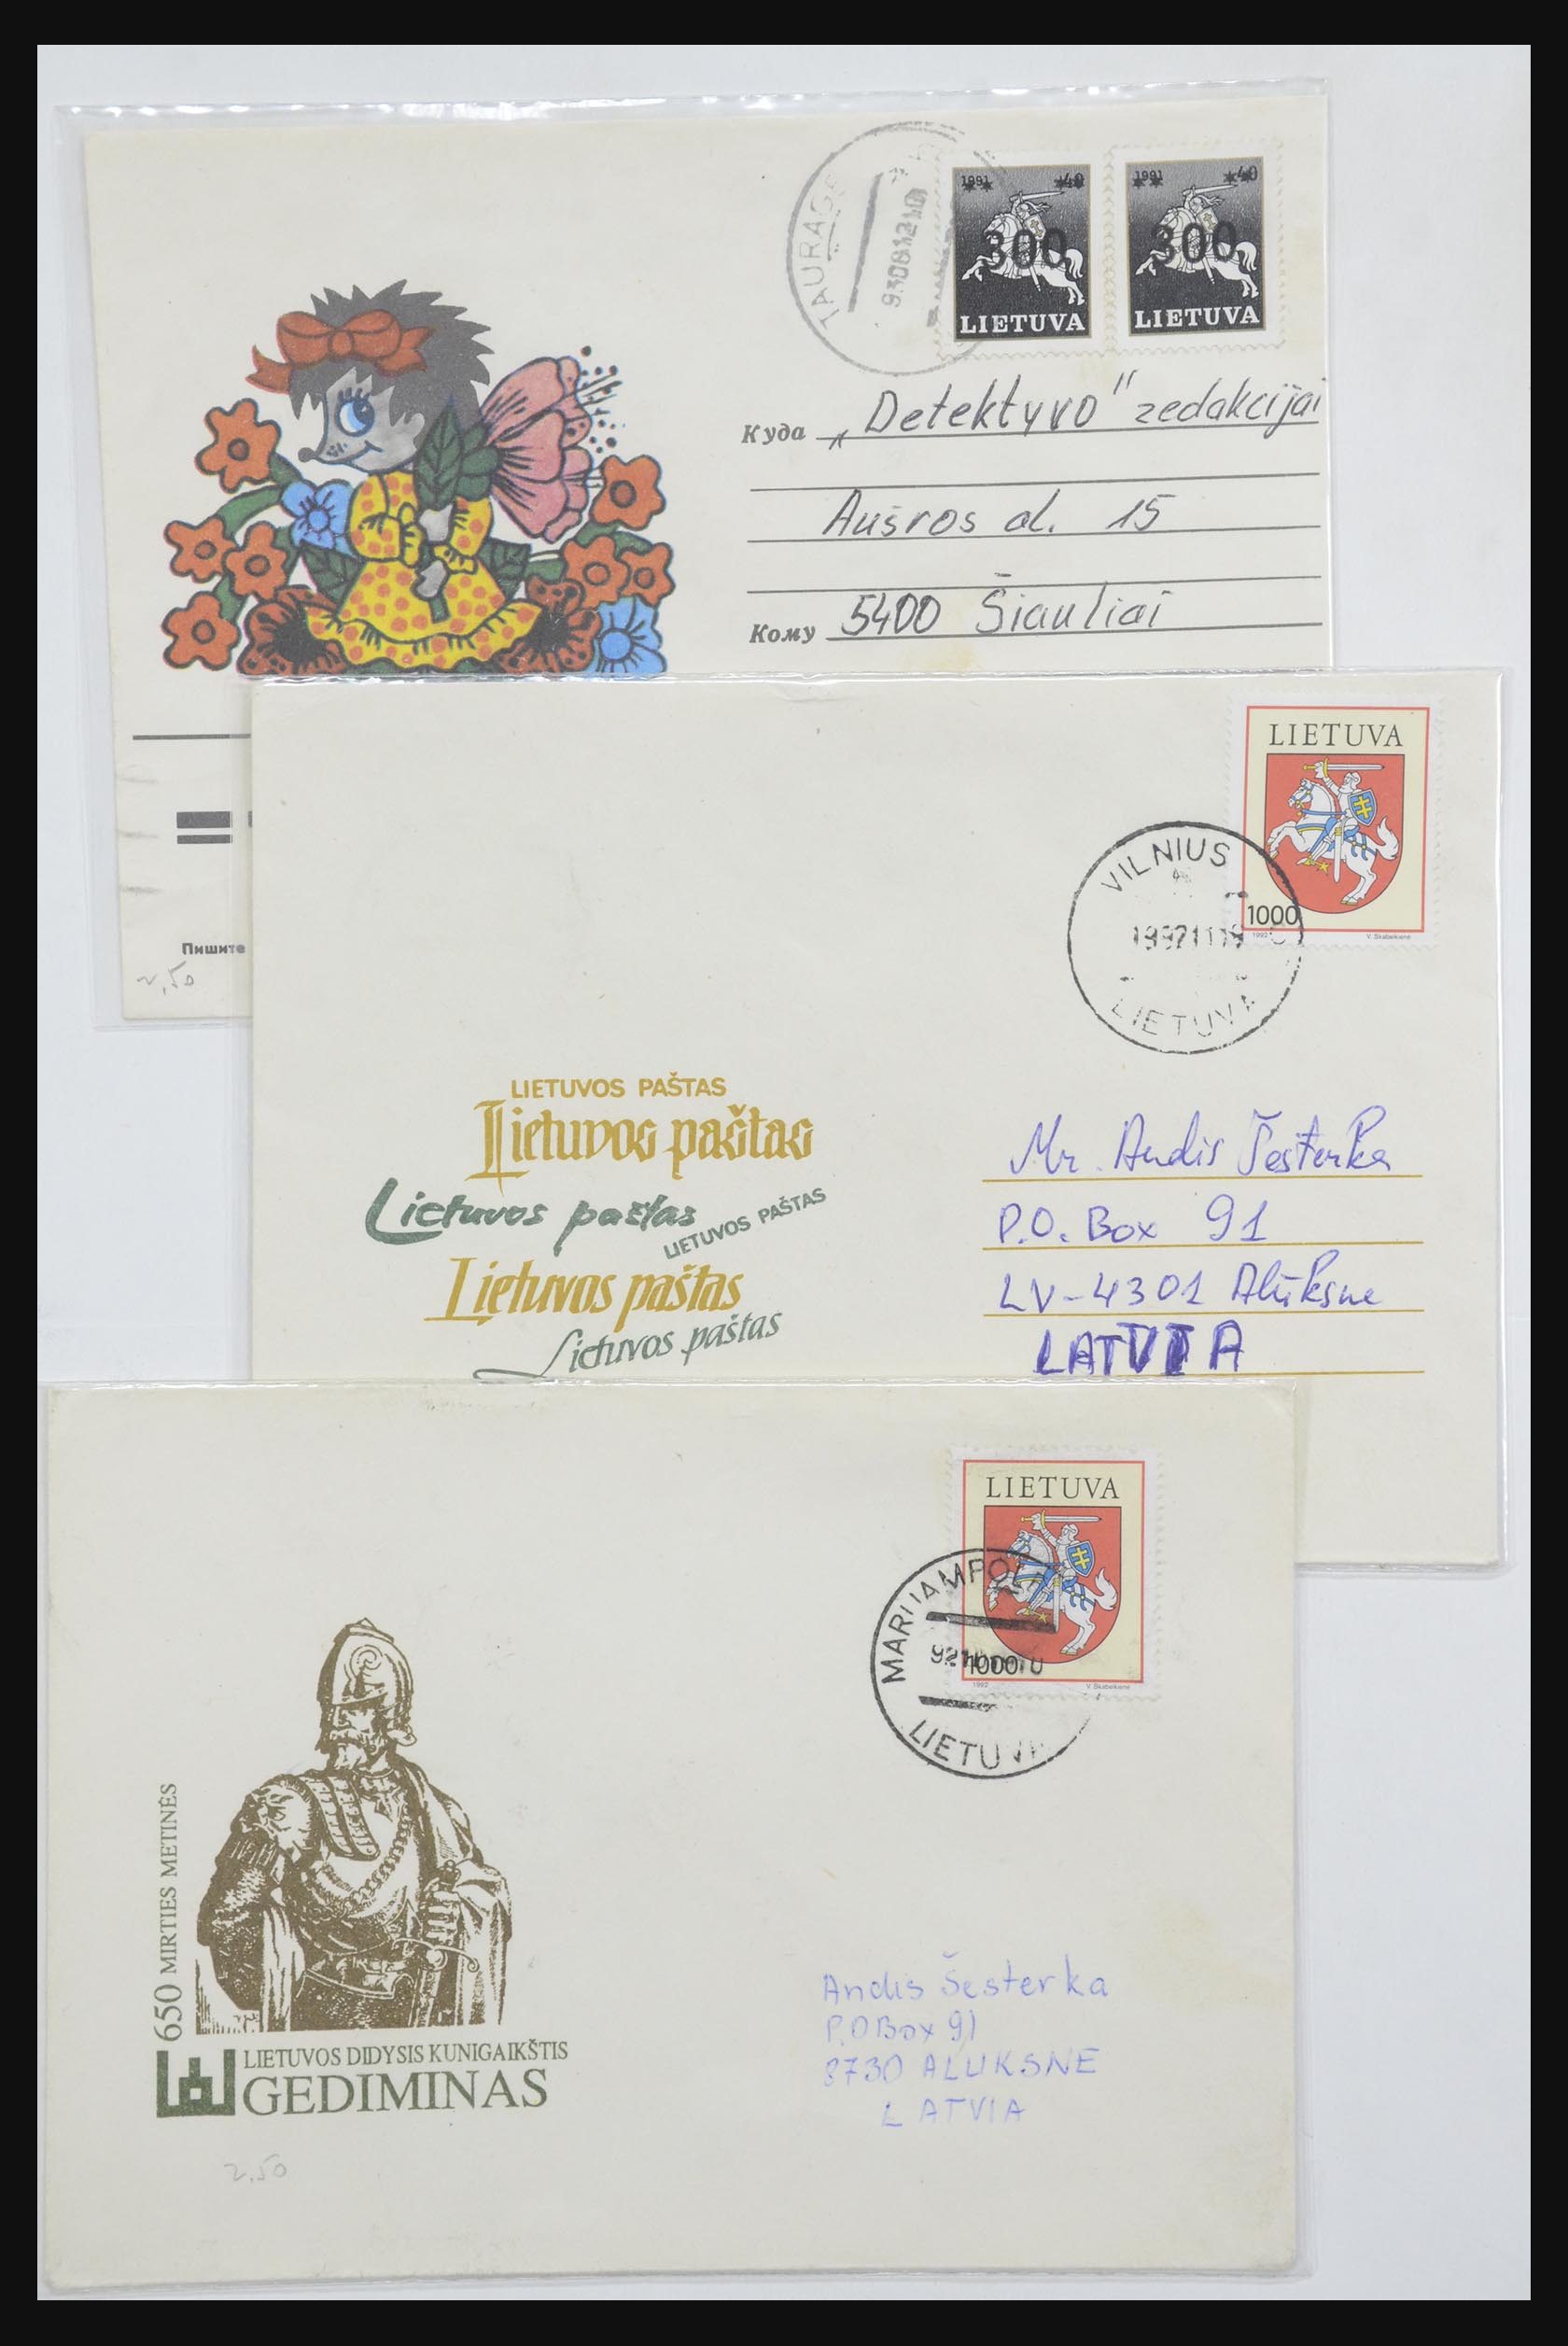 31928 1713 - 31928 Eastern Europe covers 1960's-1990's.